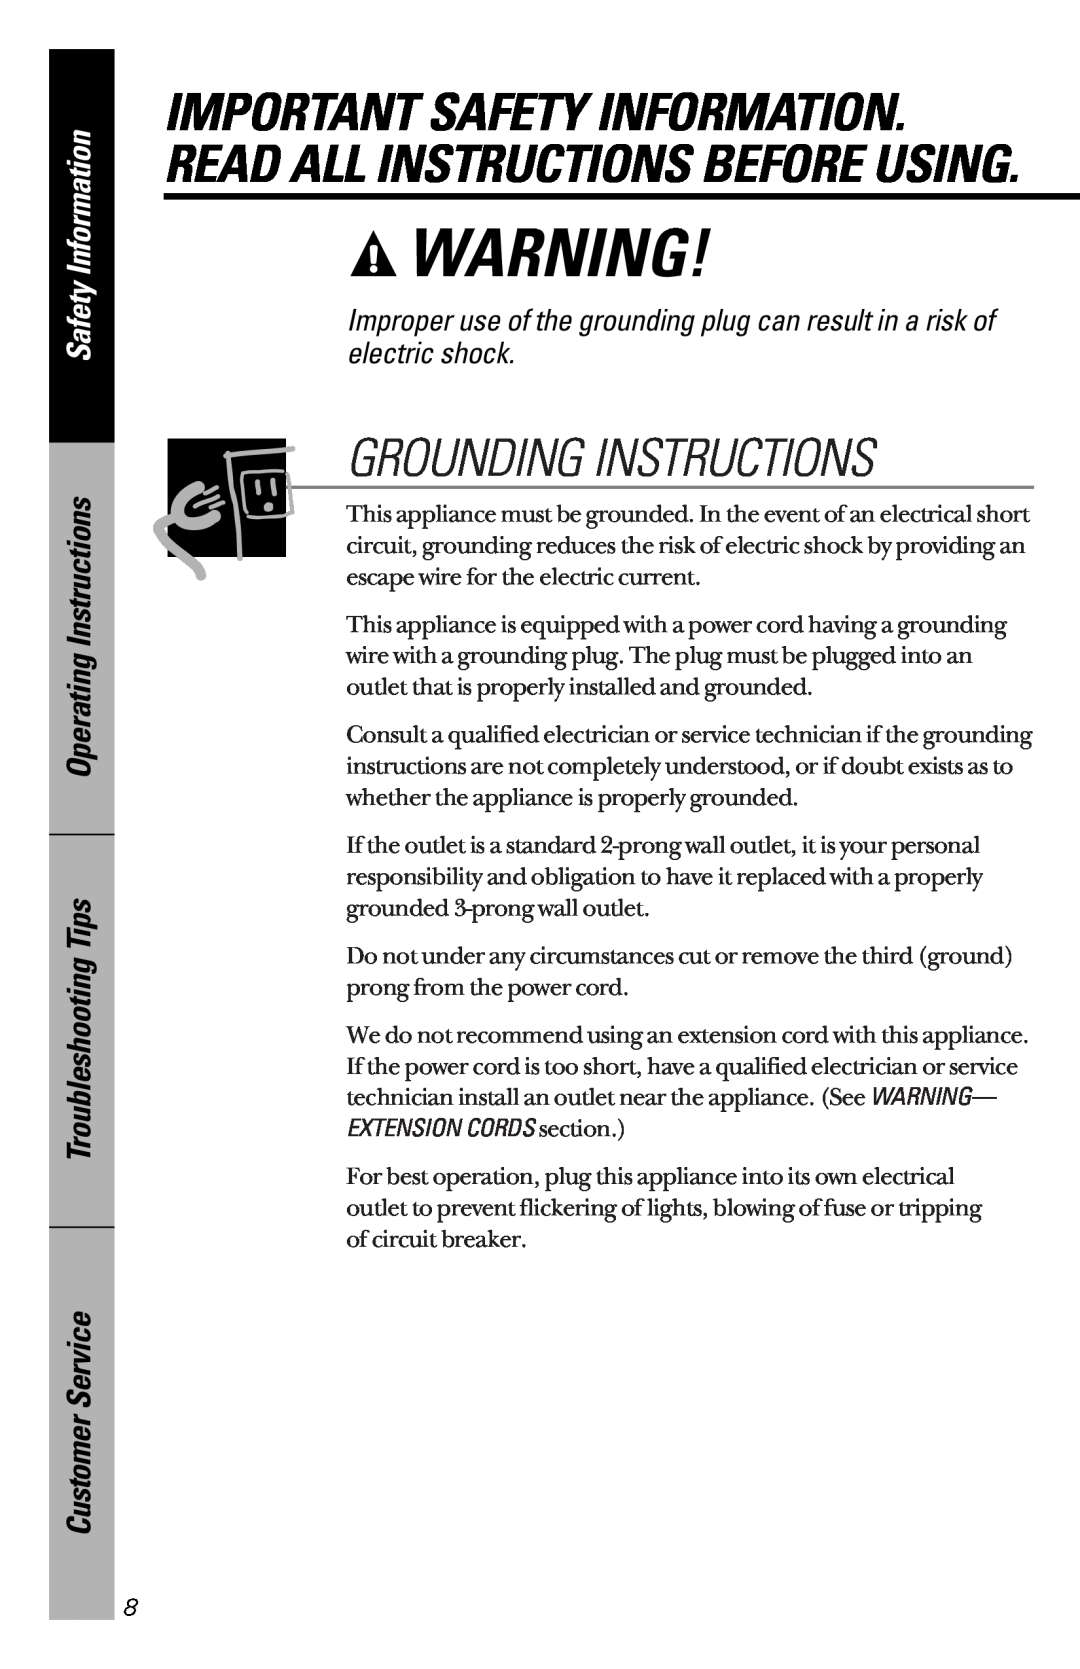 GE JES1339 Grounding Instructions, Safety Information, Operating Instructions Troubleshooting Tips, Customer Service 